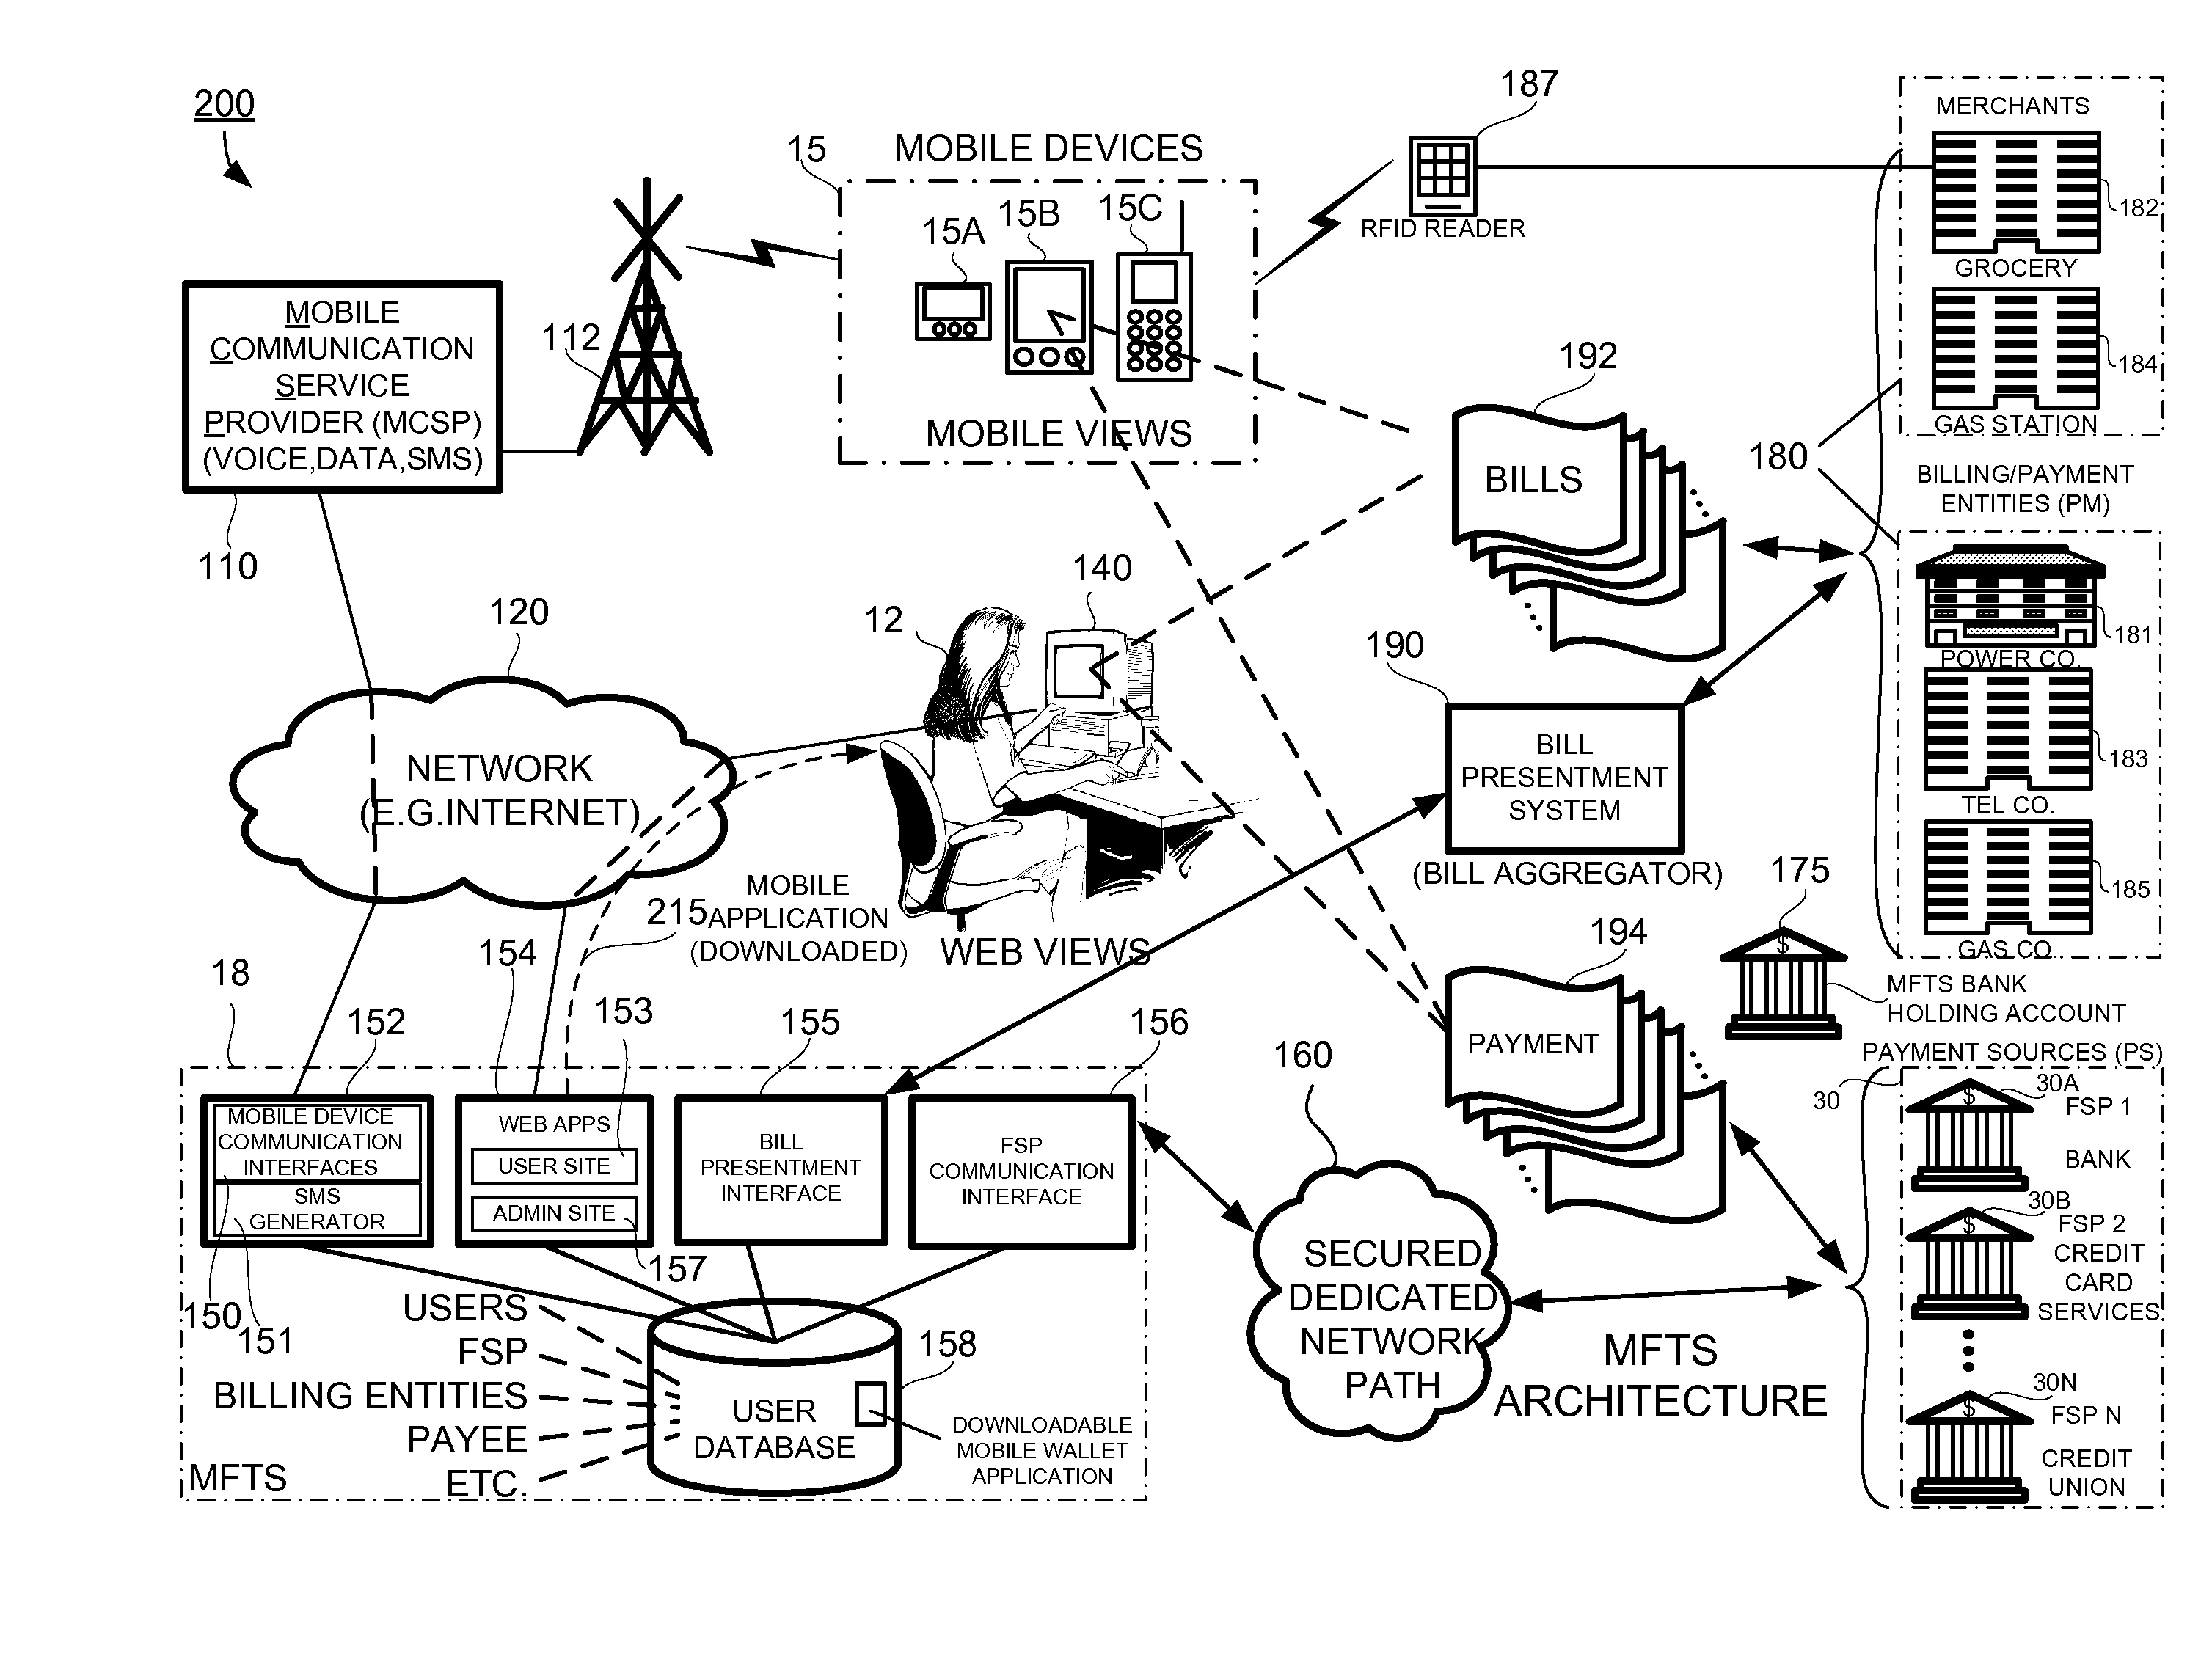 Methods and Systems For Real Time Account Balances in a Mobile Environment